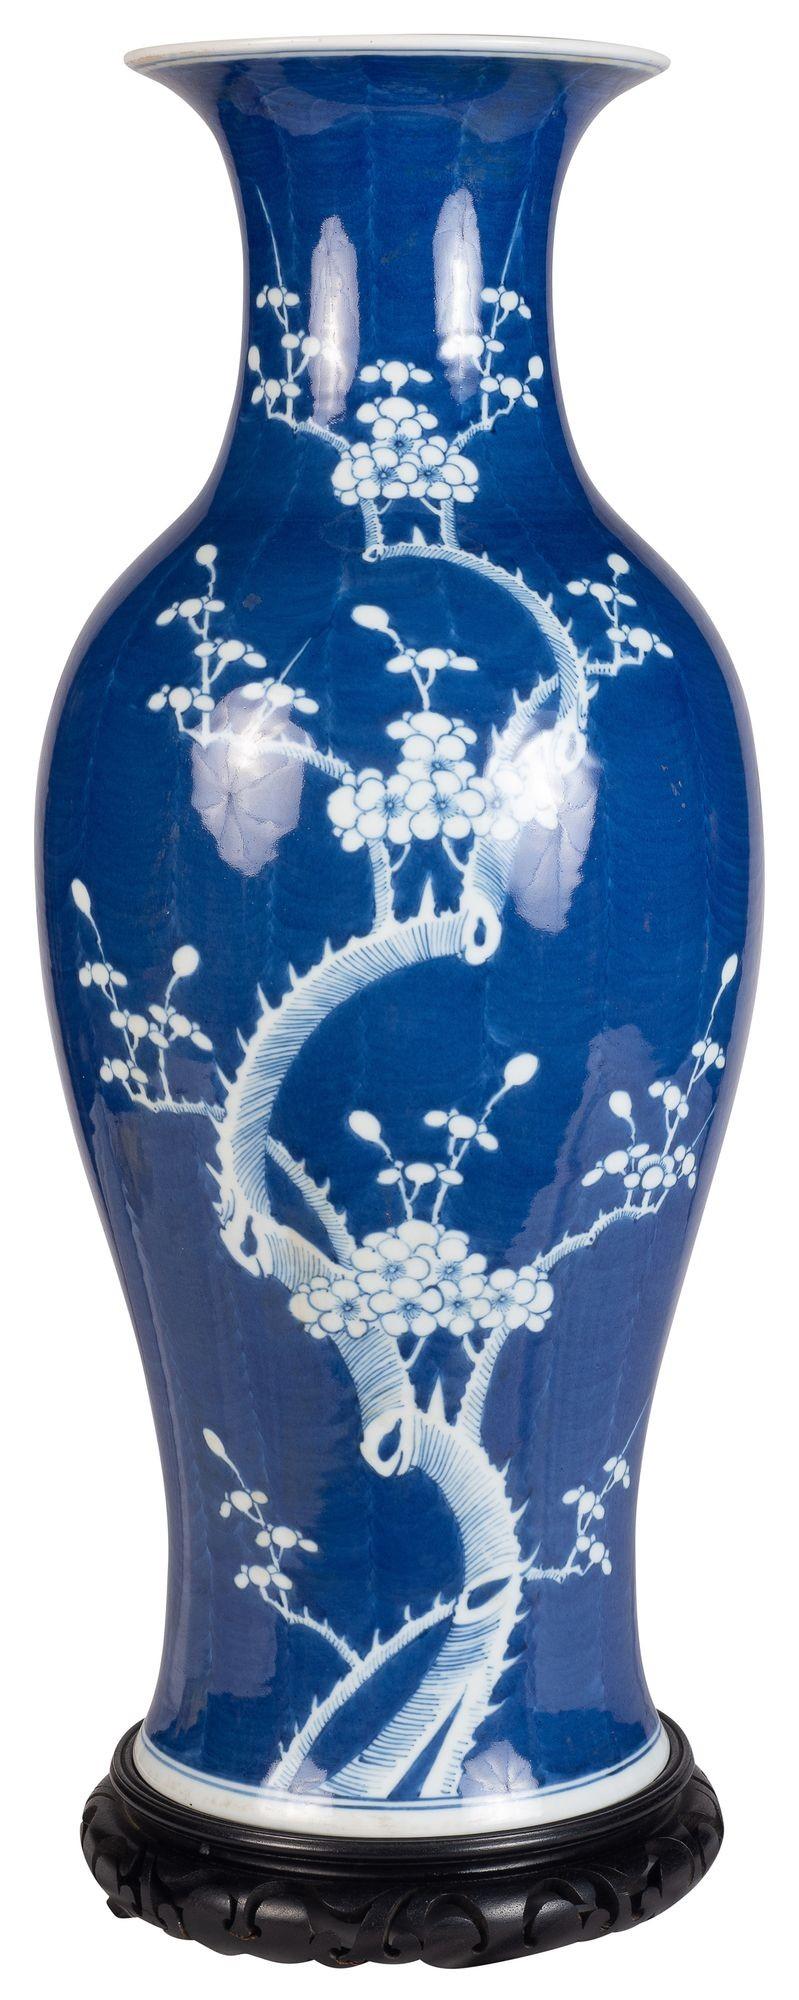 An impressive late 19th Century Chinese Blue and White Prunus blossom vase/lamp, circa 1890

Batch 74 N/H